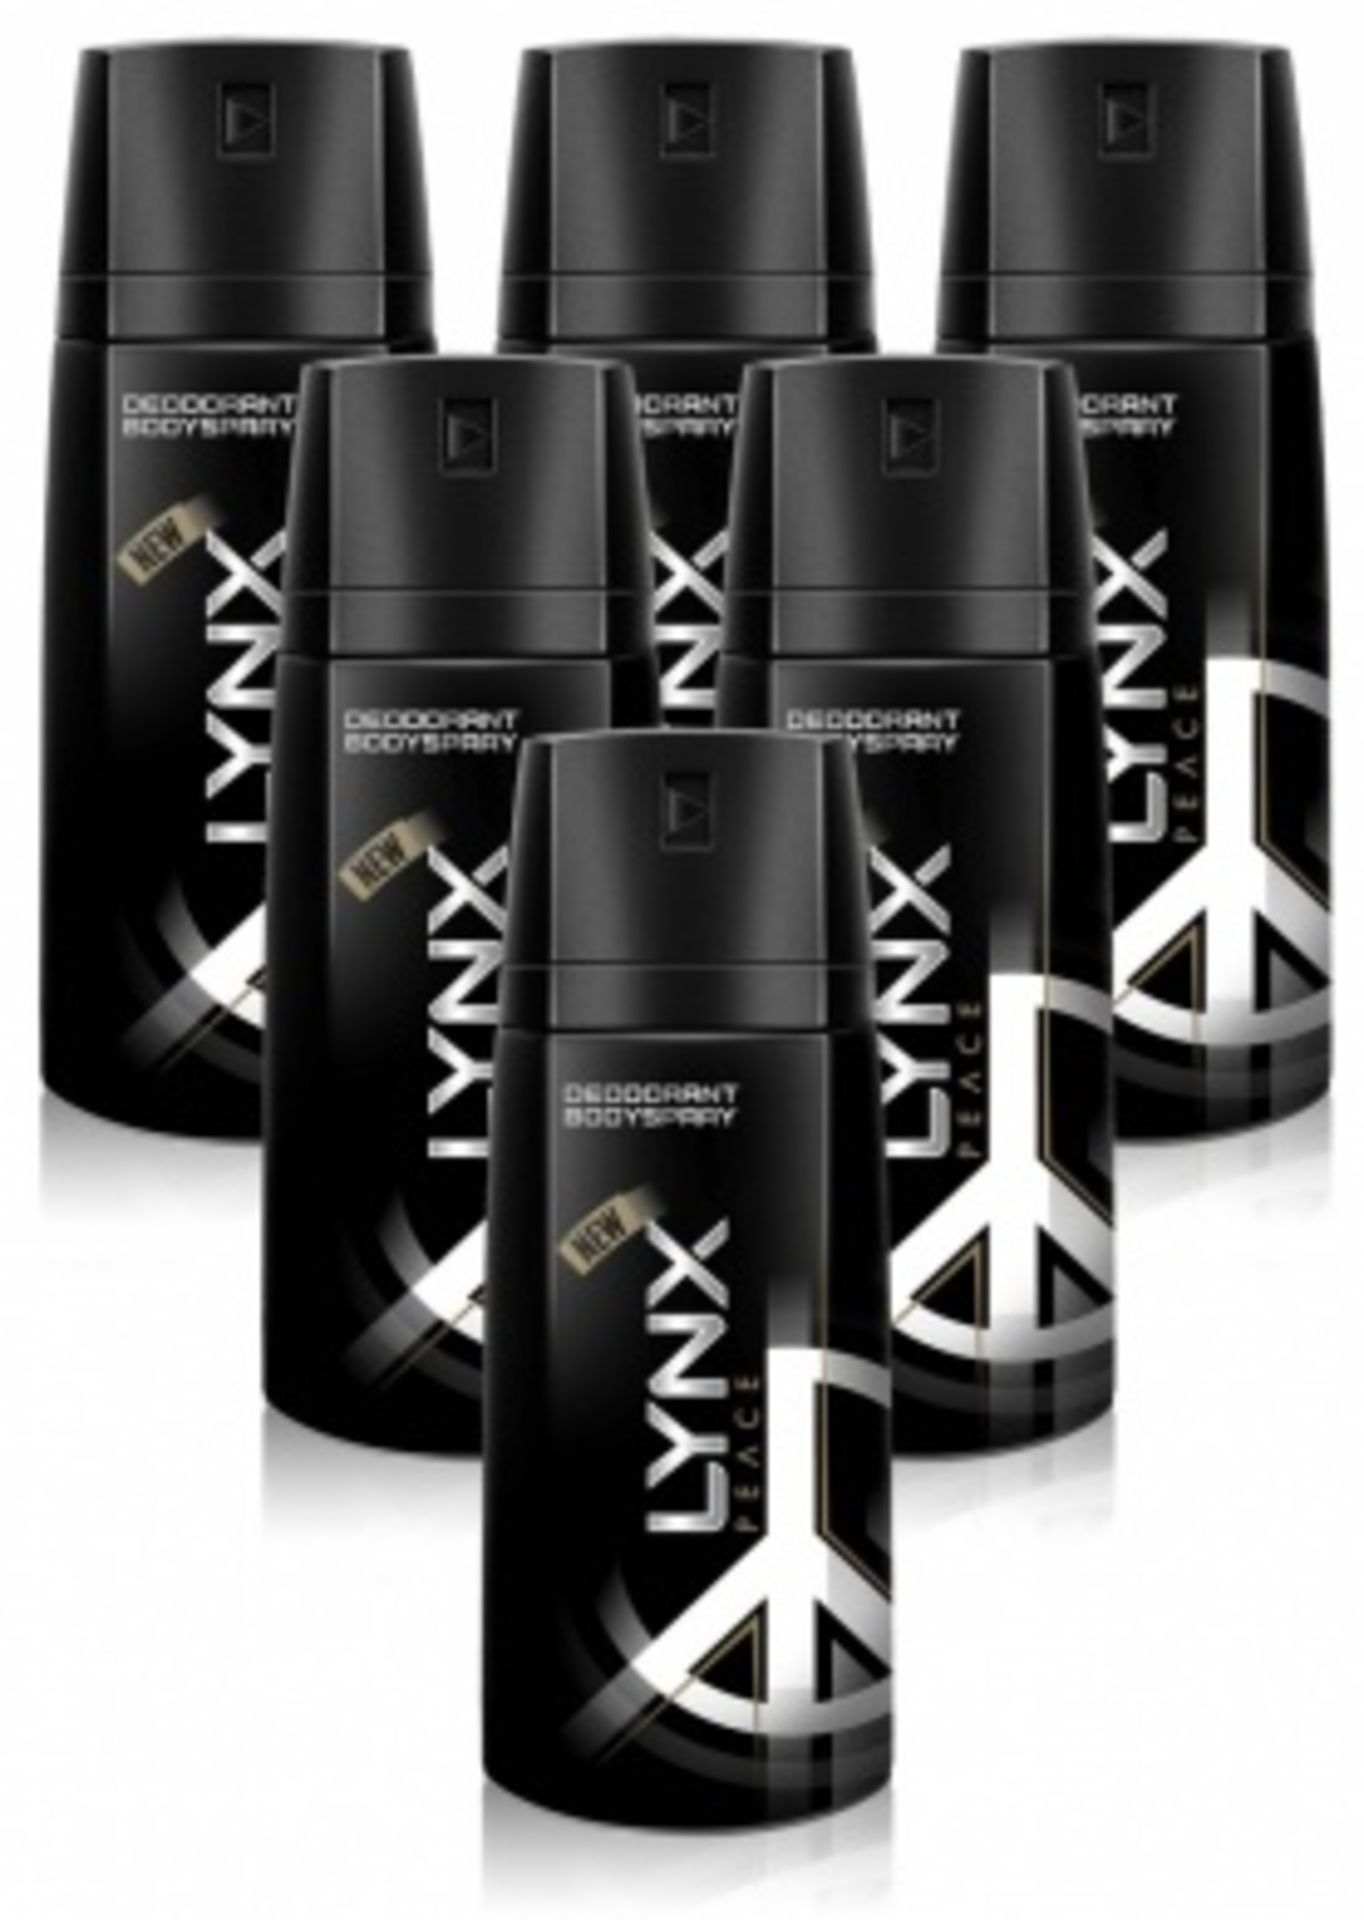 V Brand New 6 x Lynx (Axe) Peace Deodorant Body Spray 150ml Total ISP For 6 £18.90 (Picture shows